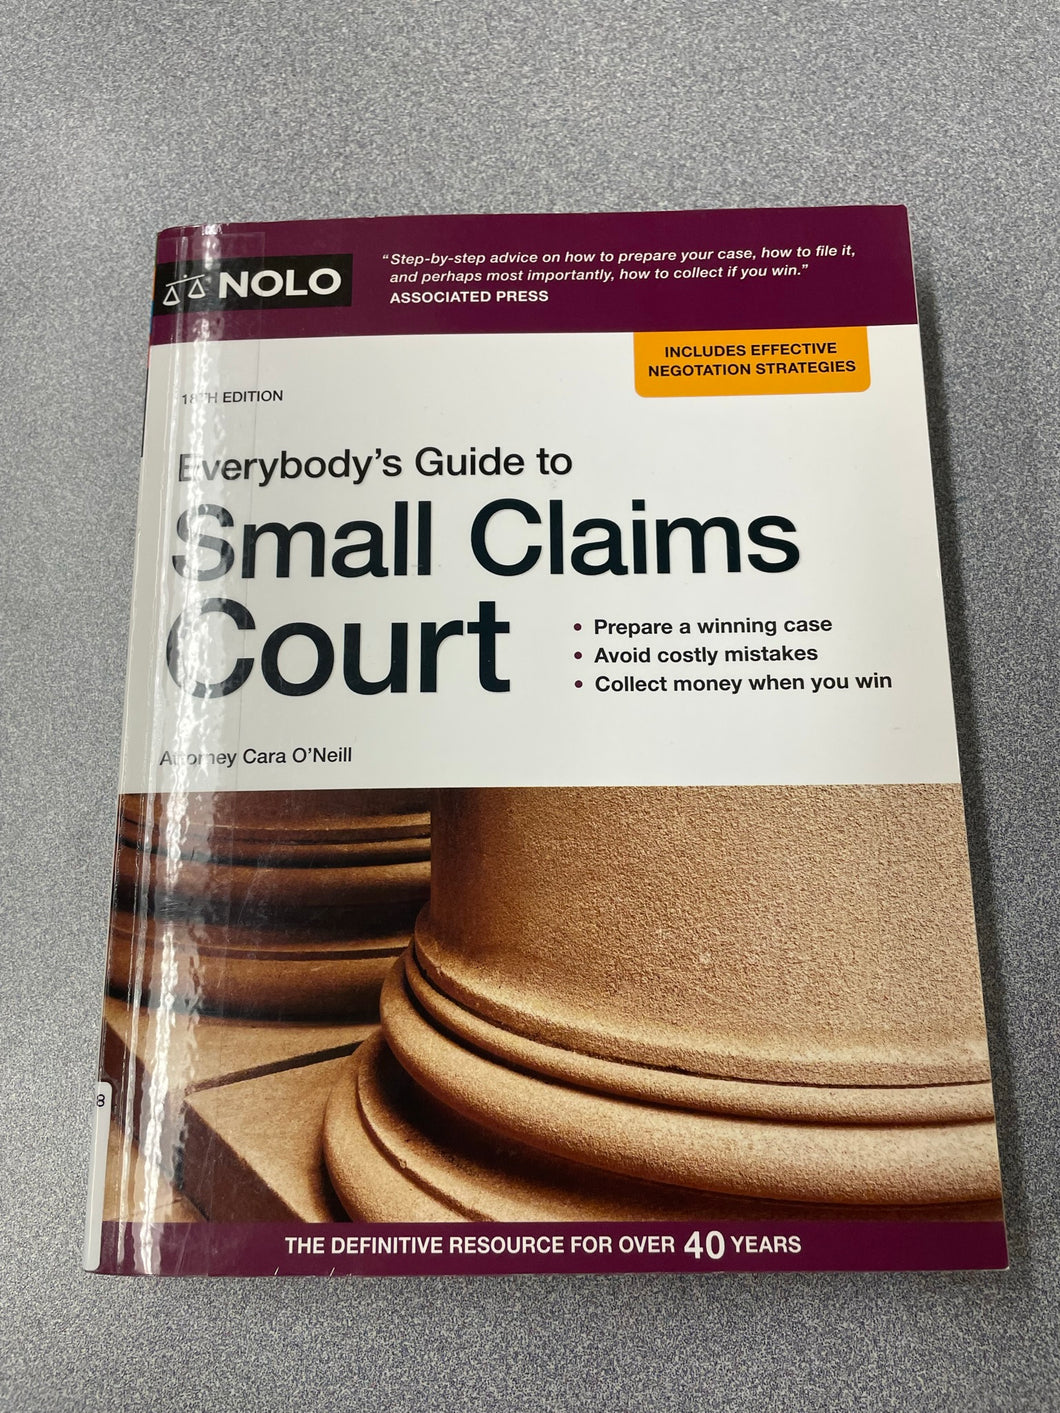 Everybody's Guide to Small Claims Court: Prepare a Winning Case, Avoid Costly Mistakes, Collect Money When You Win, O'Neill, Cara [2020] LAW 10/22